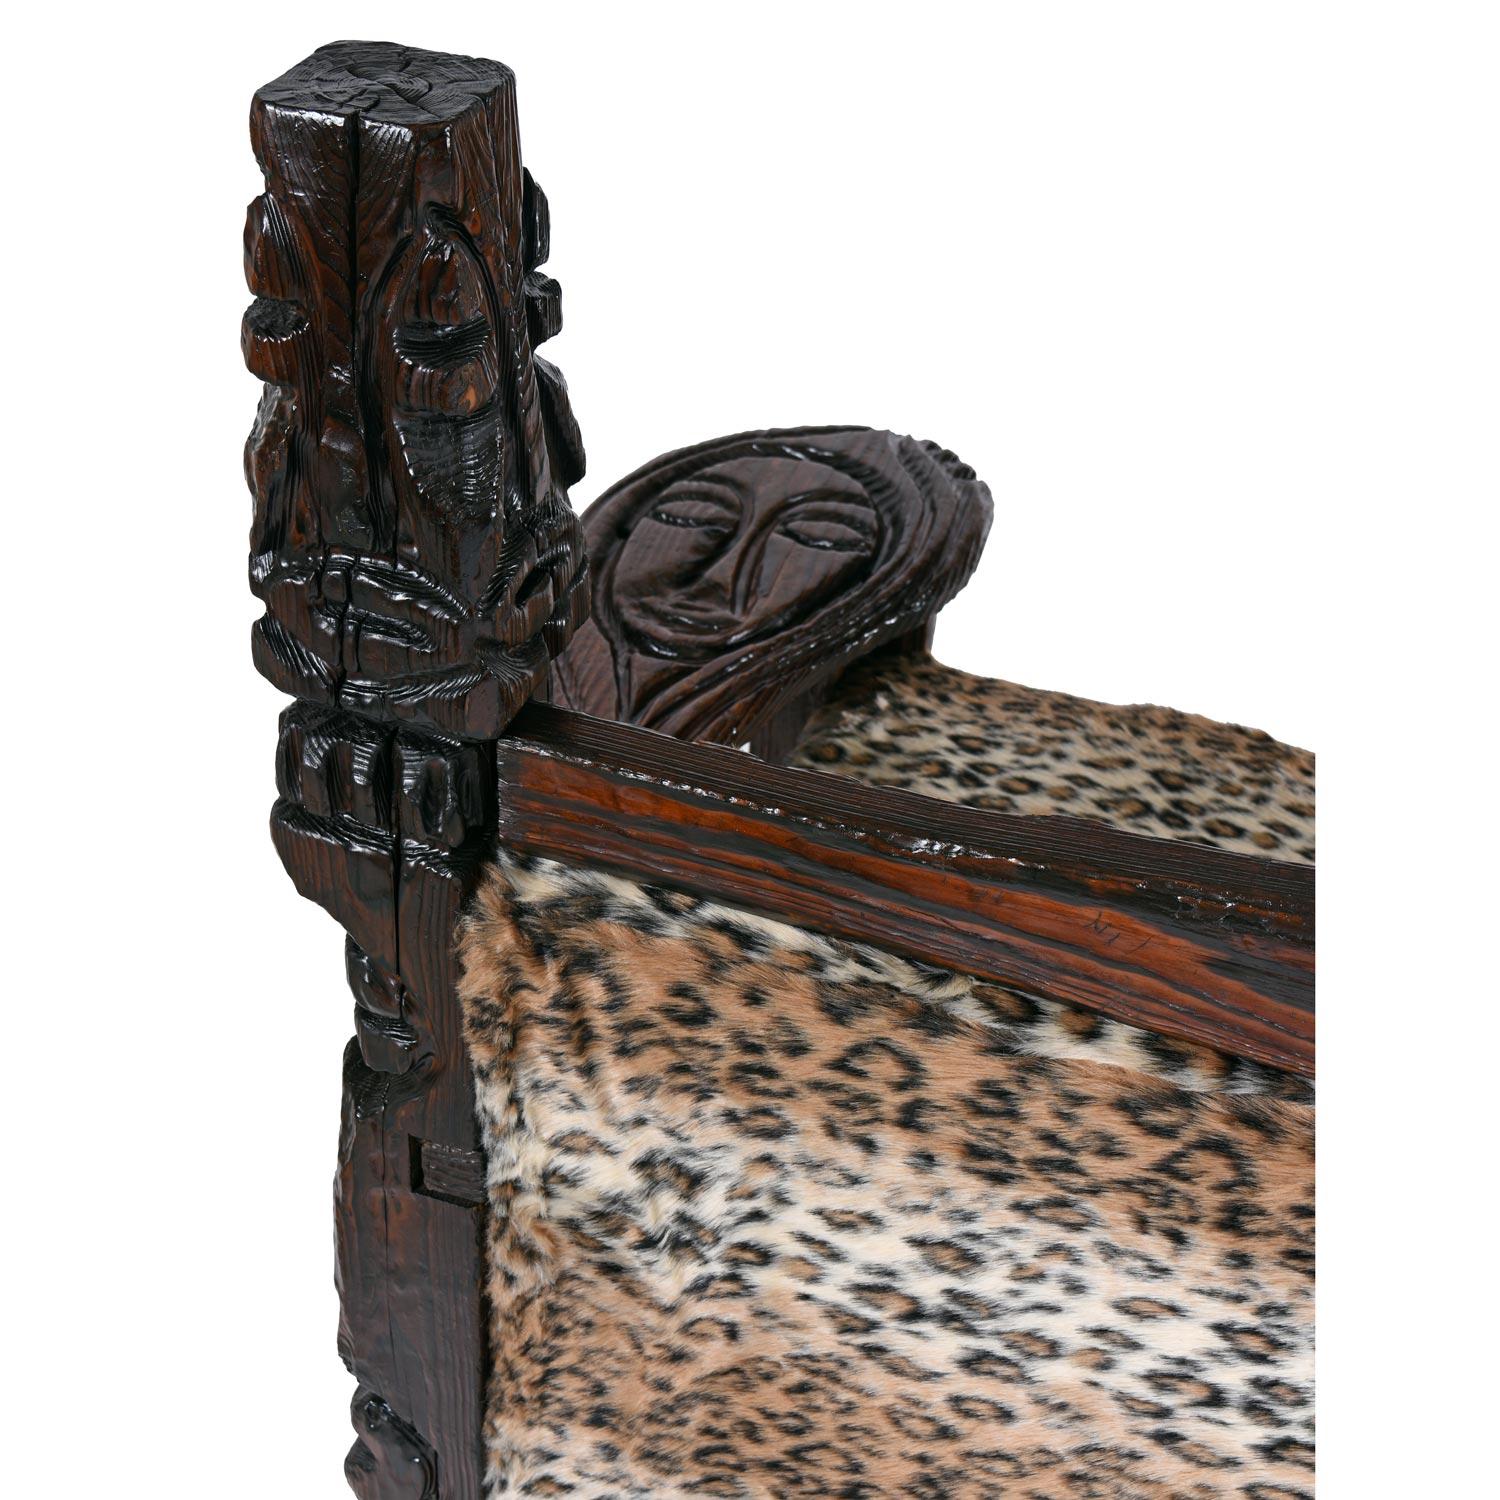 Jungle Room Faux Leopard Fur Hand Carved Paddle Arm Witco Tiki Thrown Sofa For Sale 4